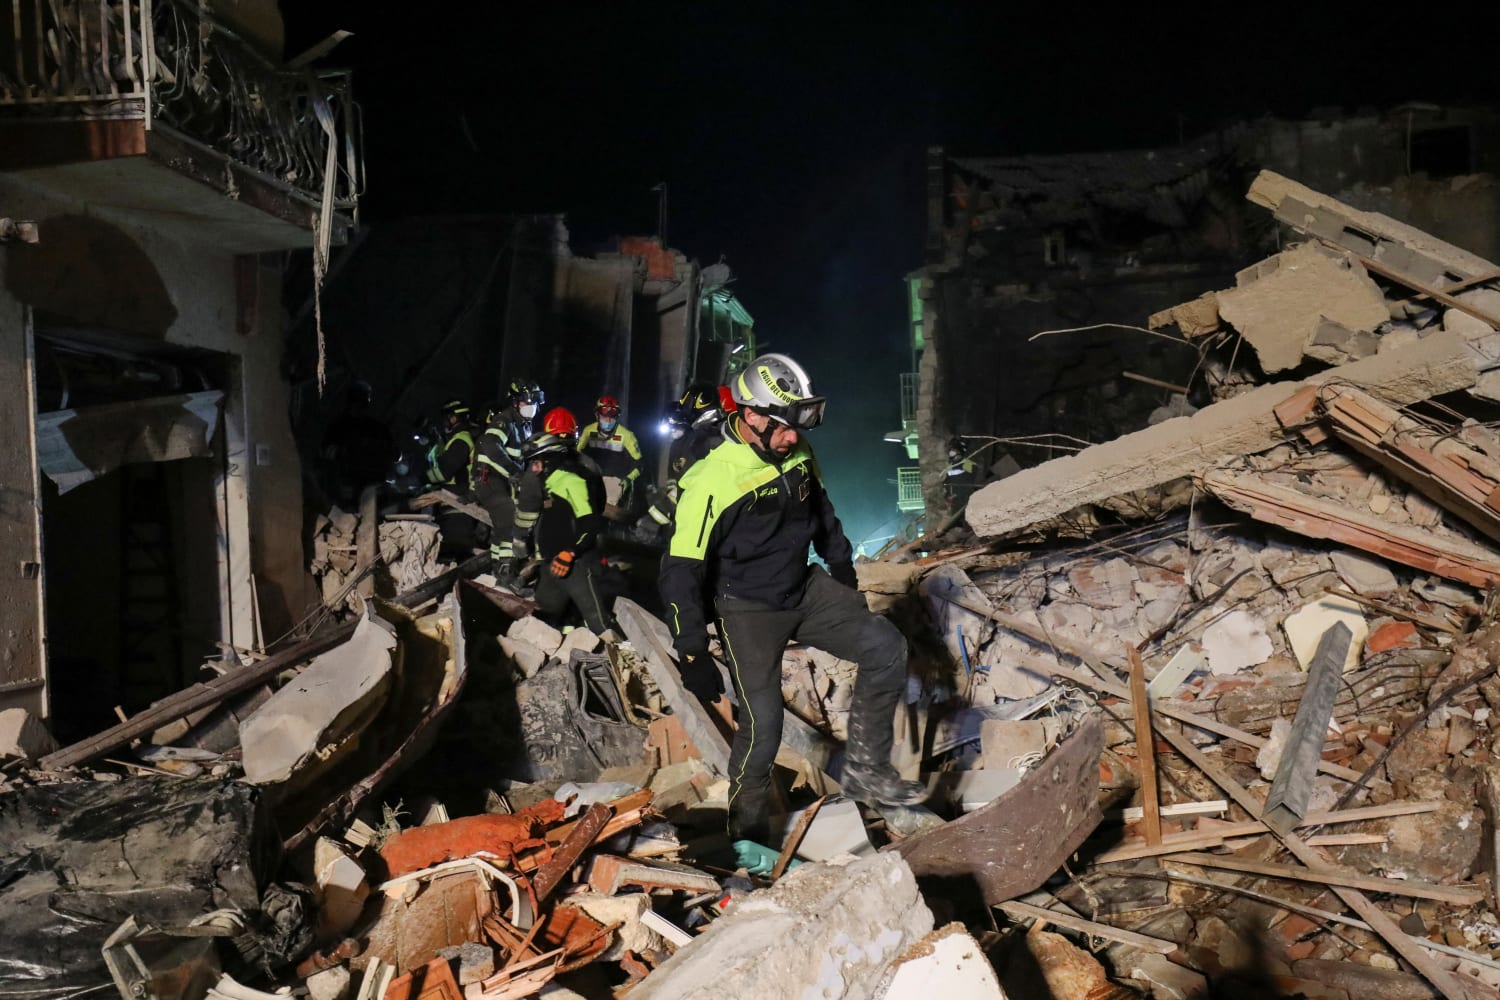 12 missing after building collapses in Italy following gas explosion